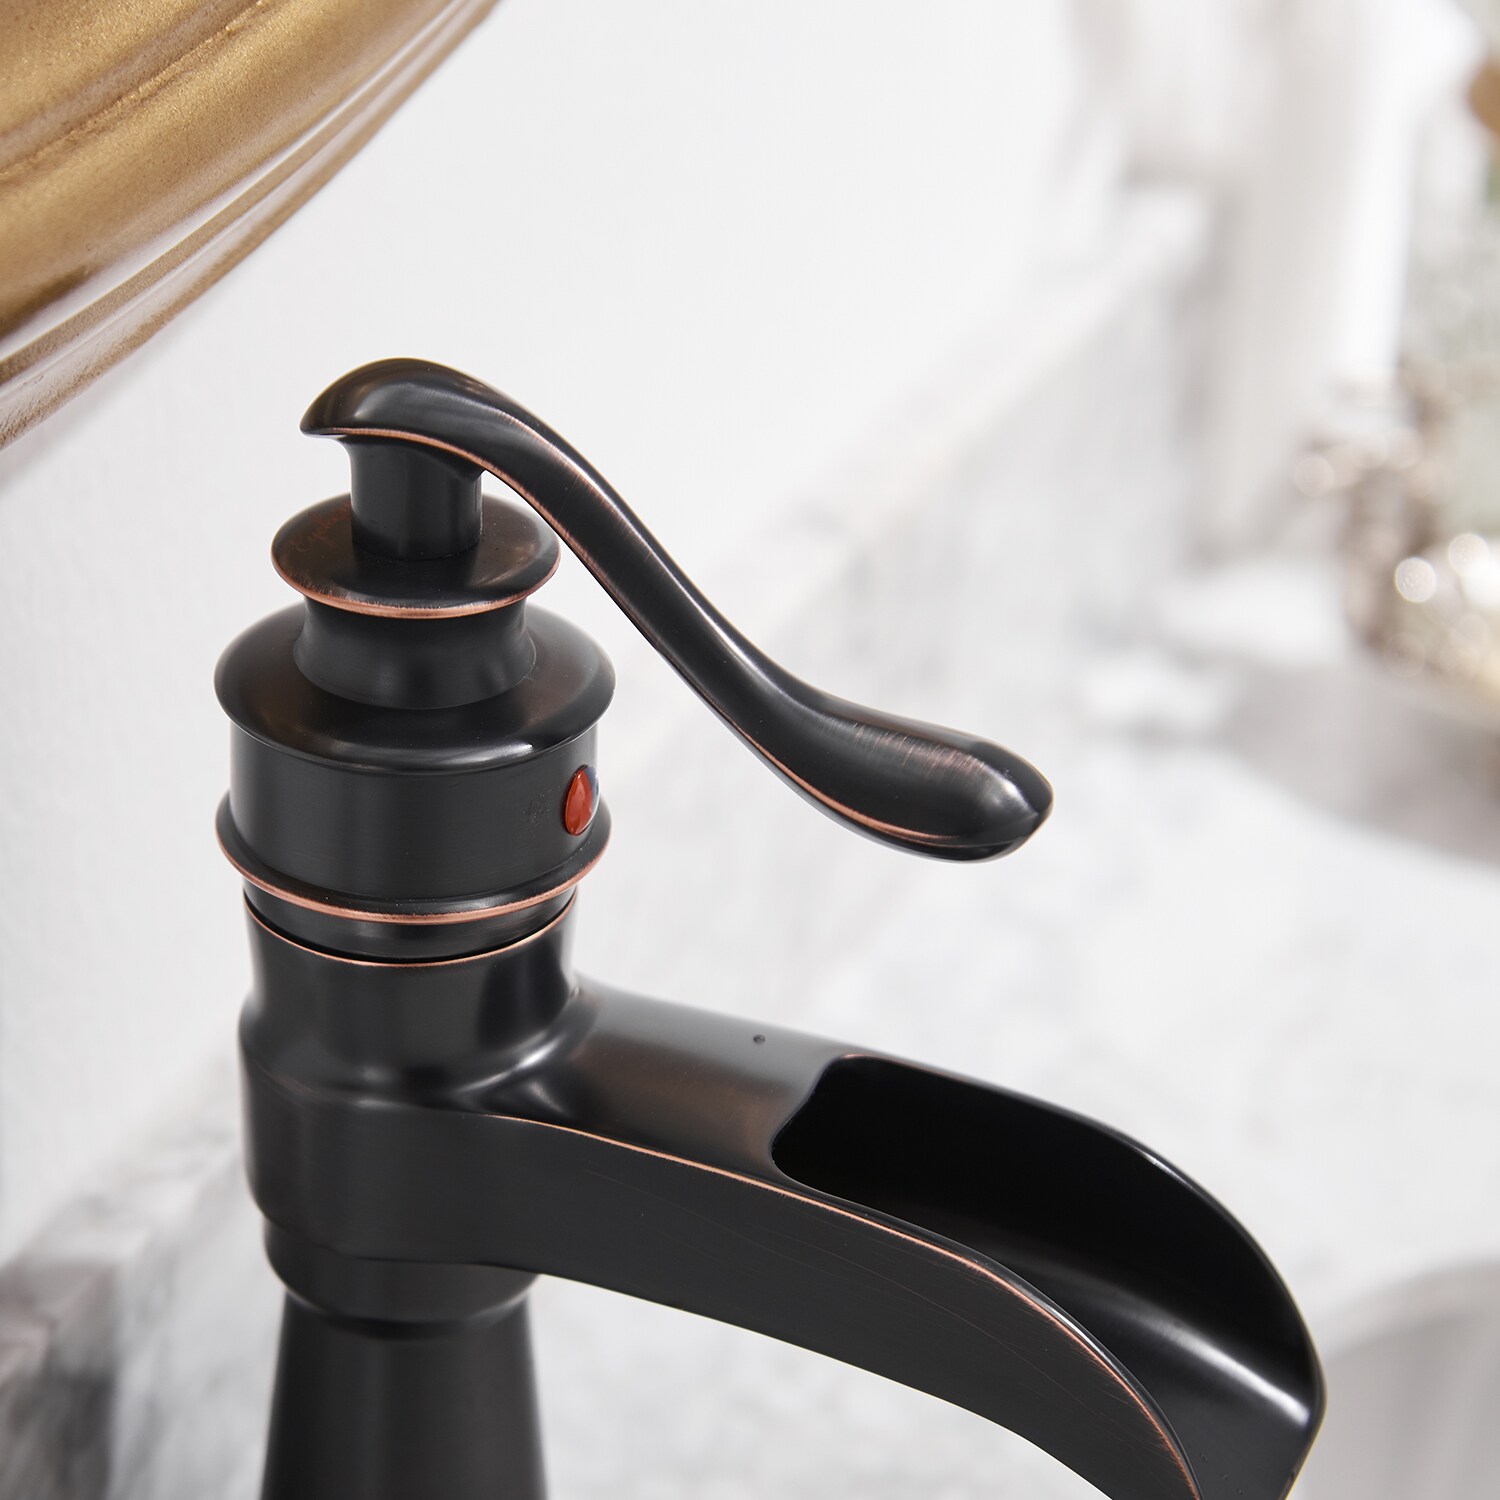 WELLFOR FOR HOME Bathroom Sink Faucets Oil Rubbed Bronze 1-handle Single Hole Waterfall Bathroom Sink Faucet with Drain with Deck Plate